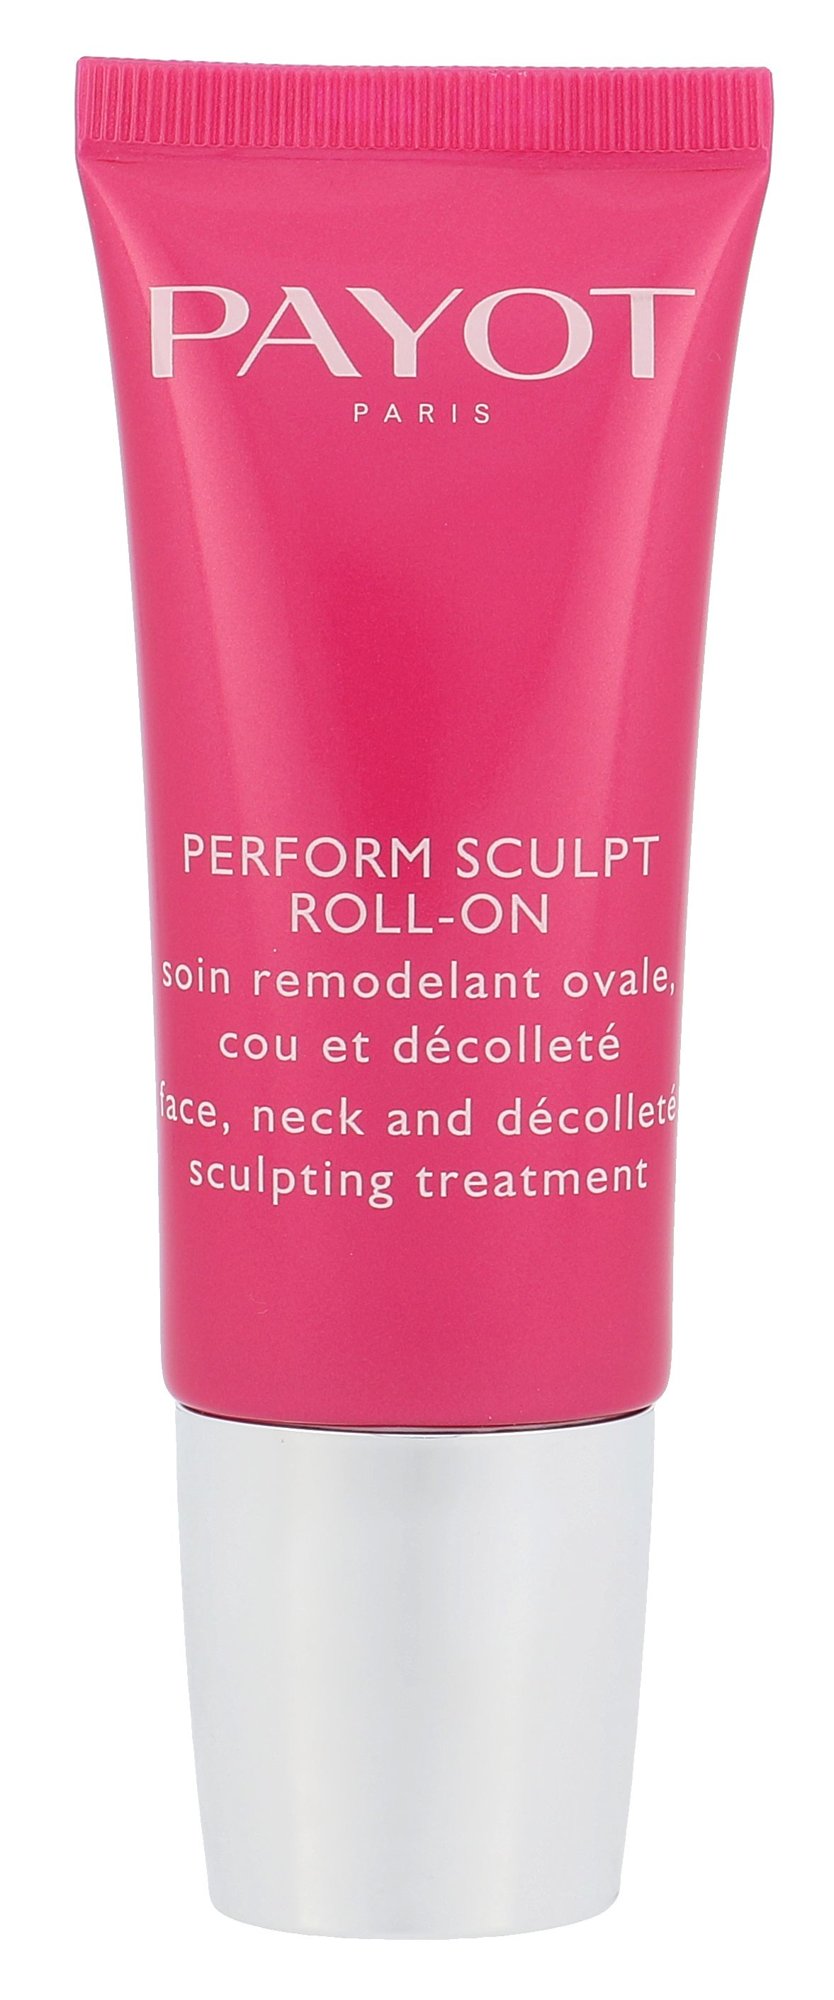 Payot Perform Sculpt Roll On